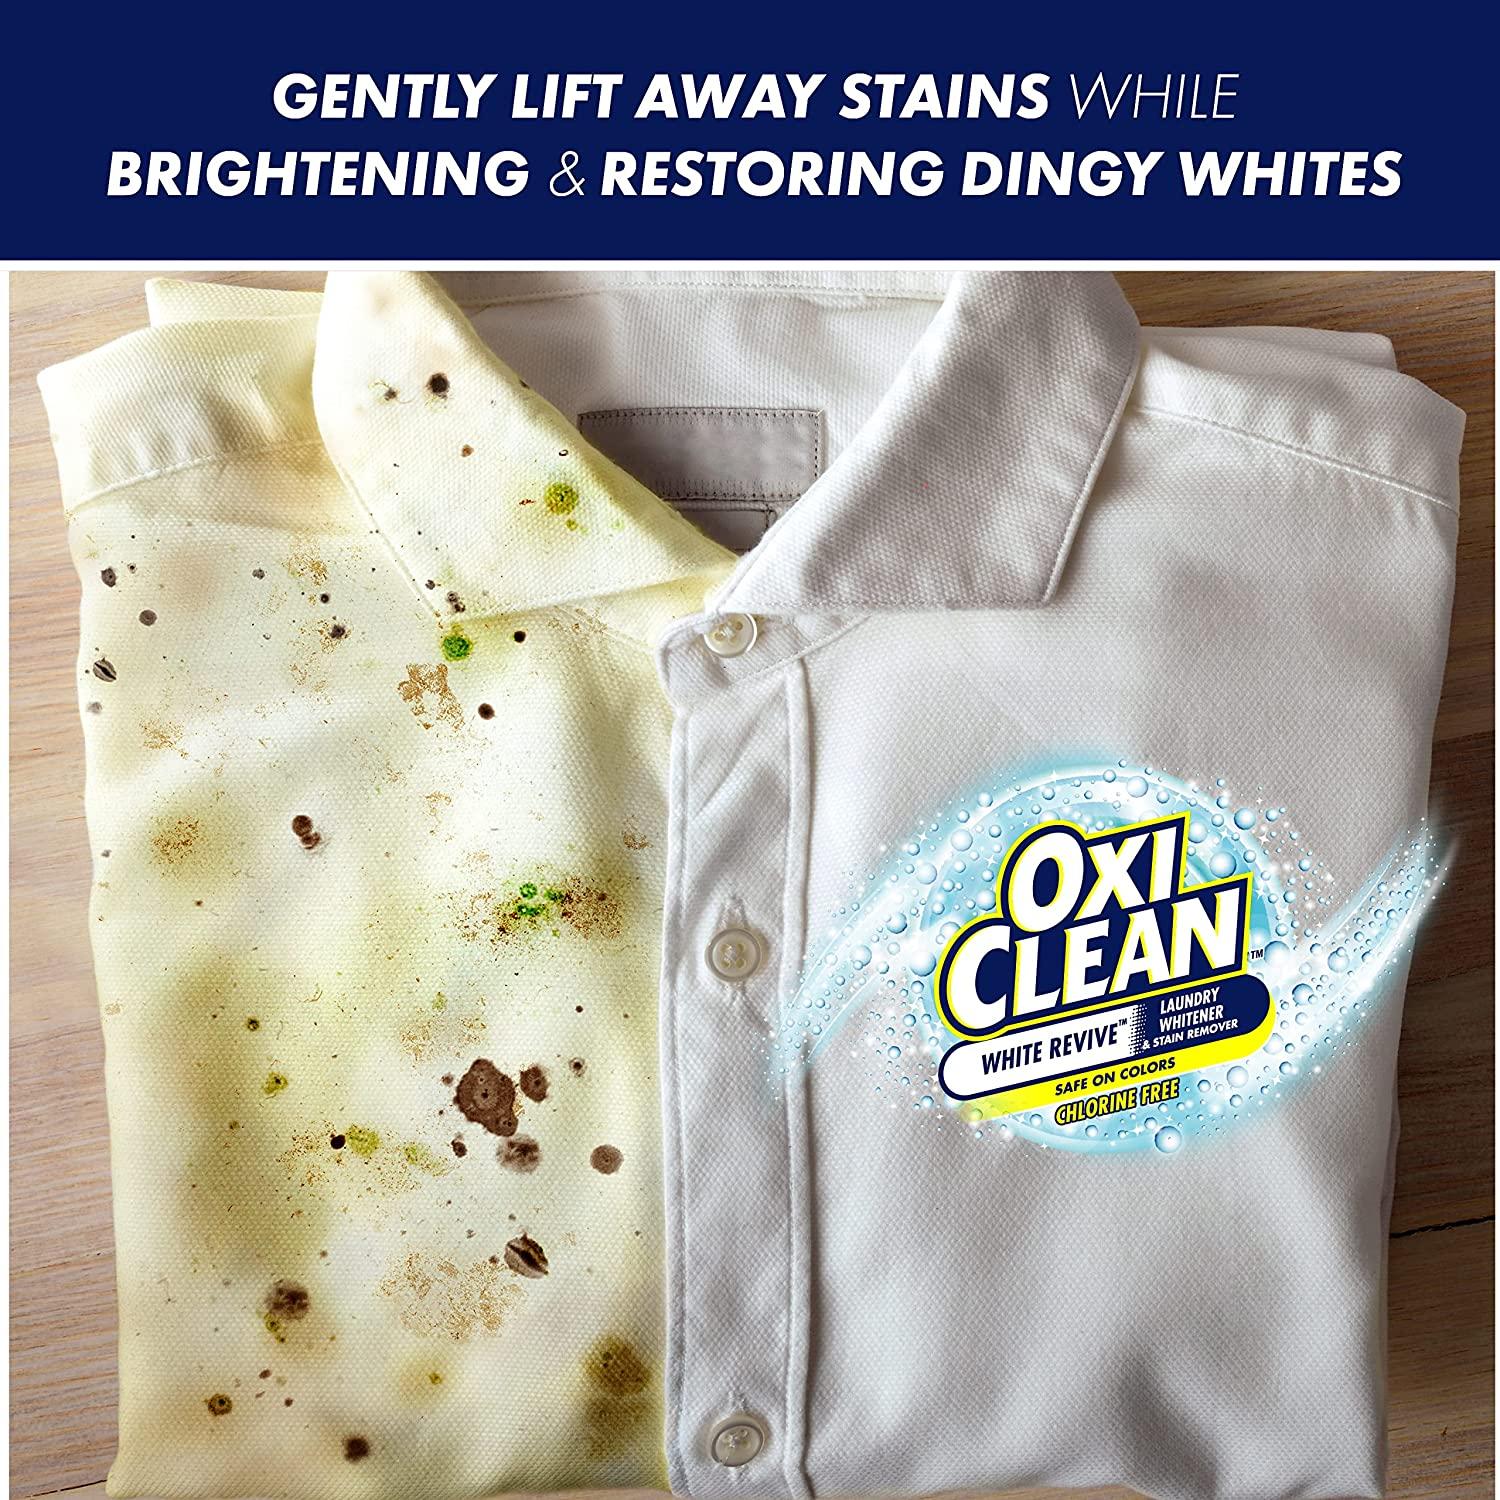 Wash Delicate Whites with OxiClean White Revive 